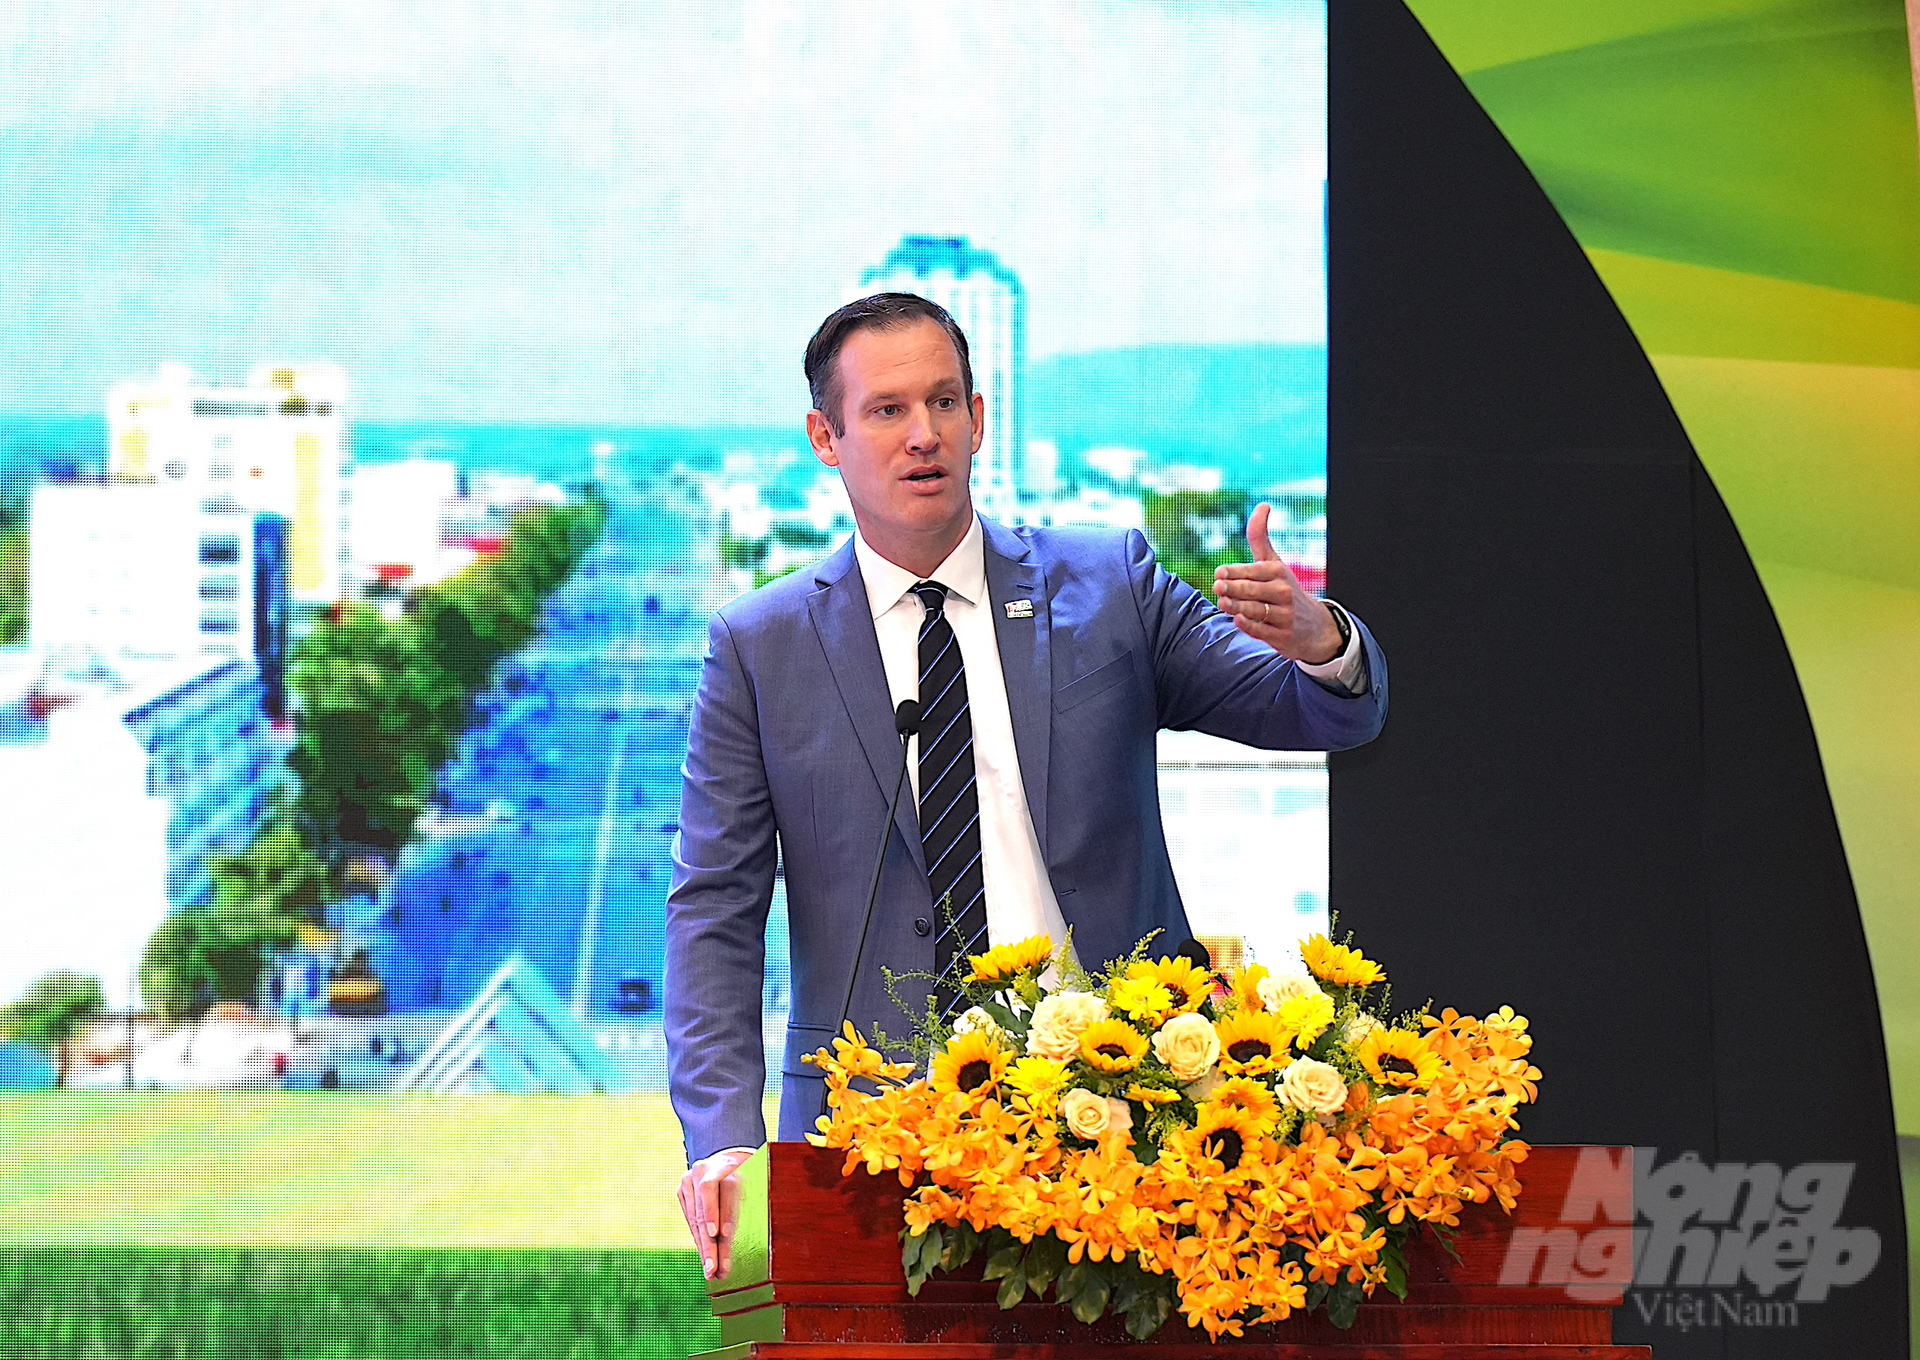 Mr. Gabor Fluit, President of the European Chamber of Commerce in Vietnam: 'Tay Ninh has exceptional potentials for high-tech agricultural development'. Photo: Hong Thuy.